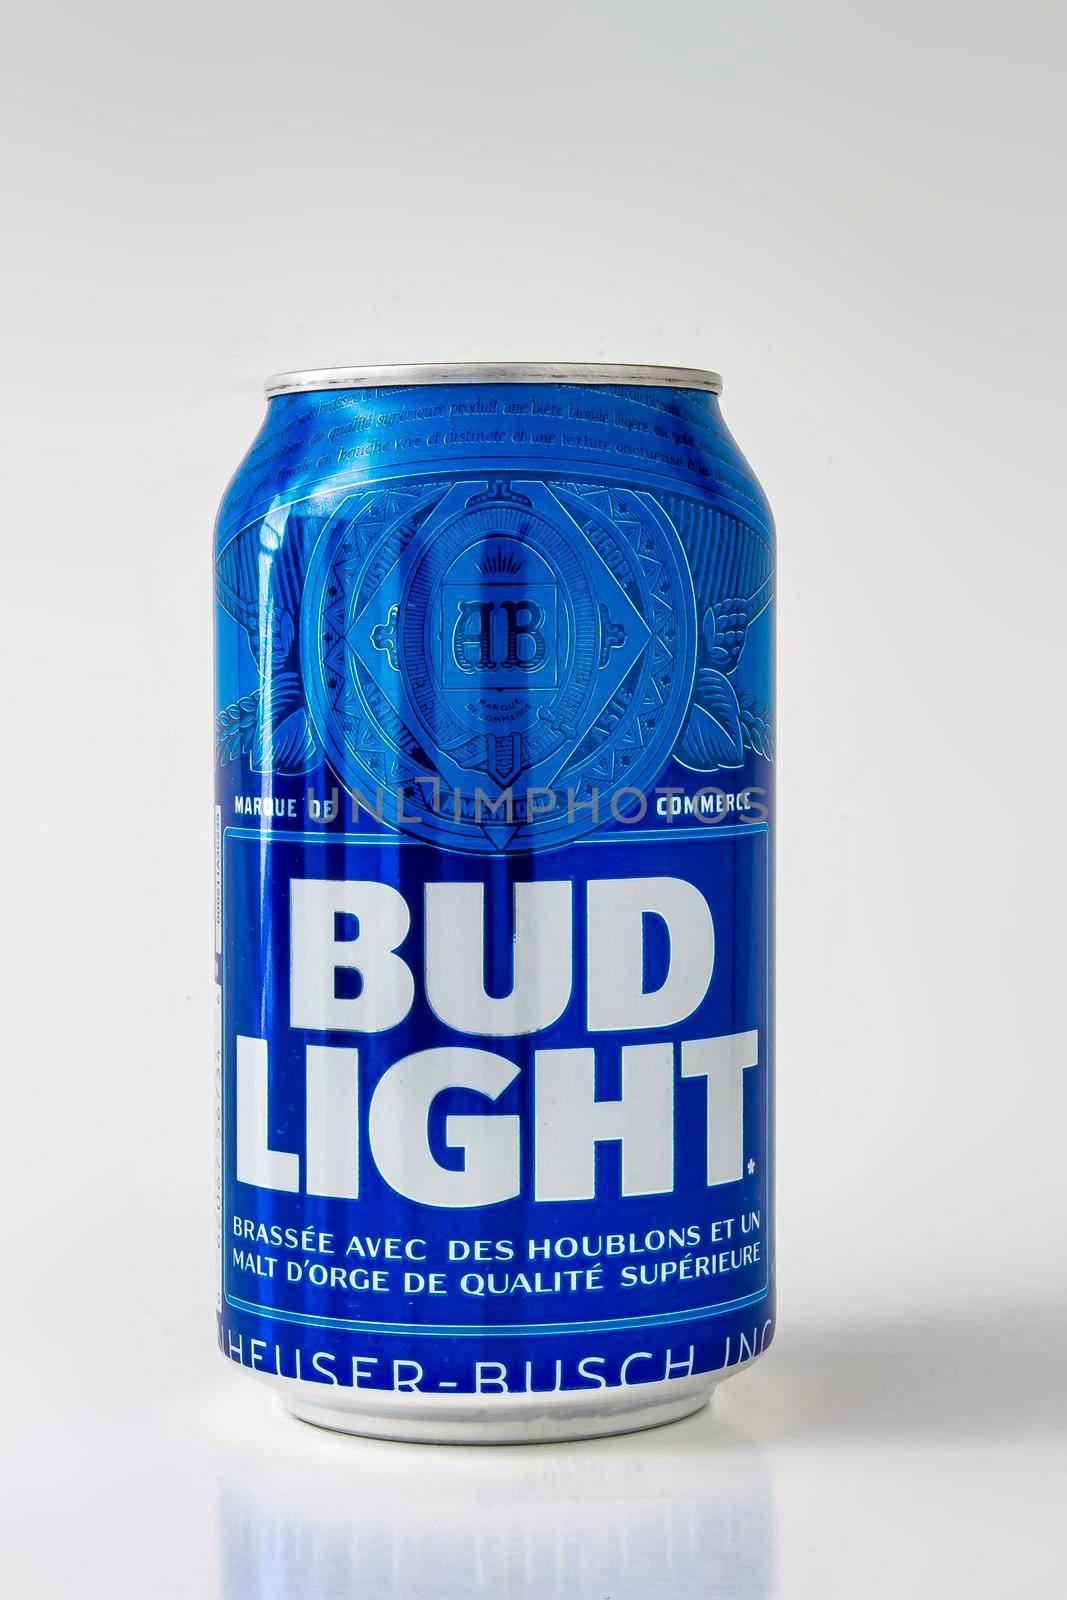 A beer can of bud light on a white background by oasisamuel